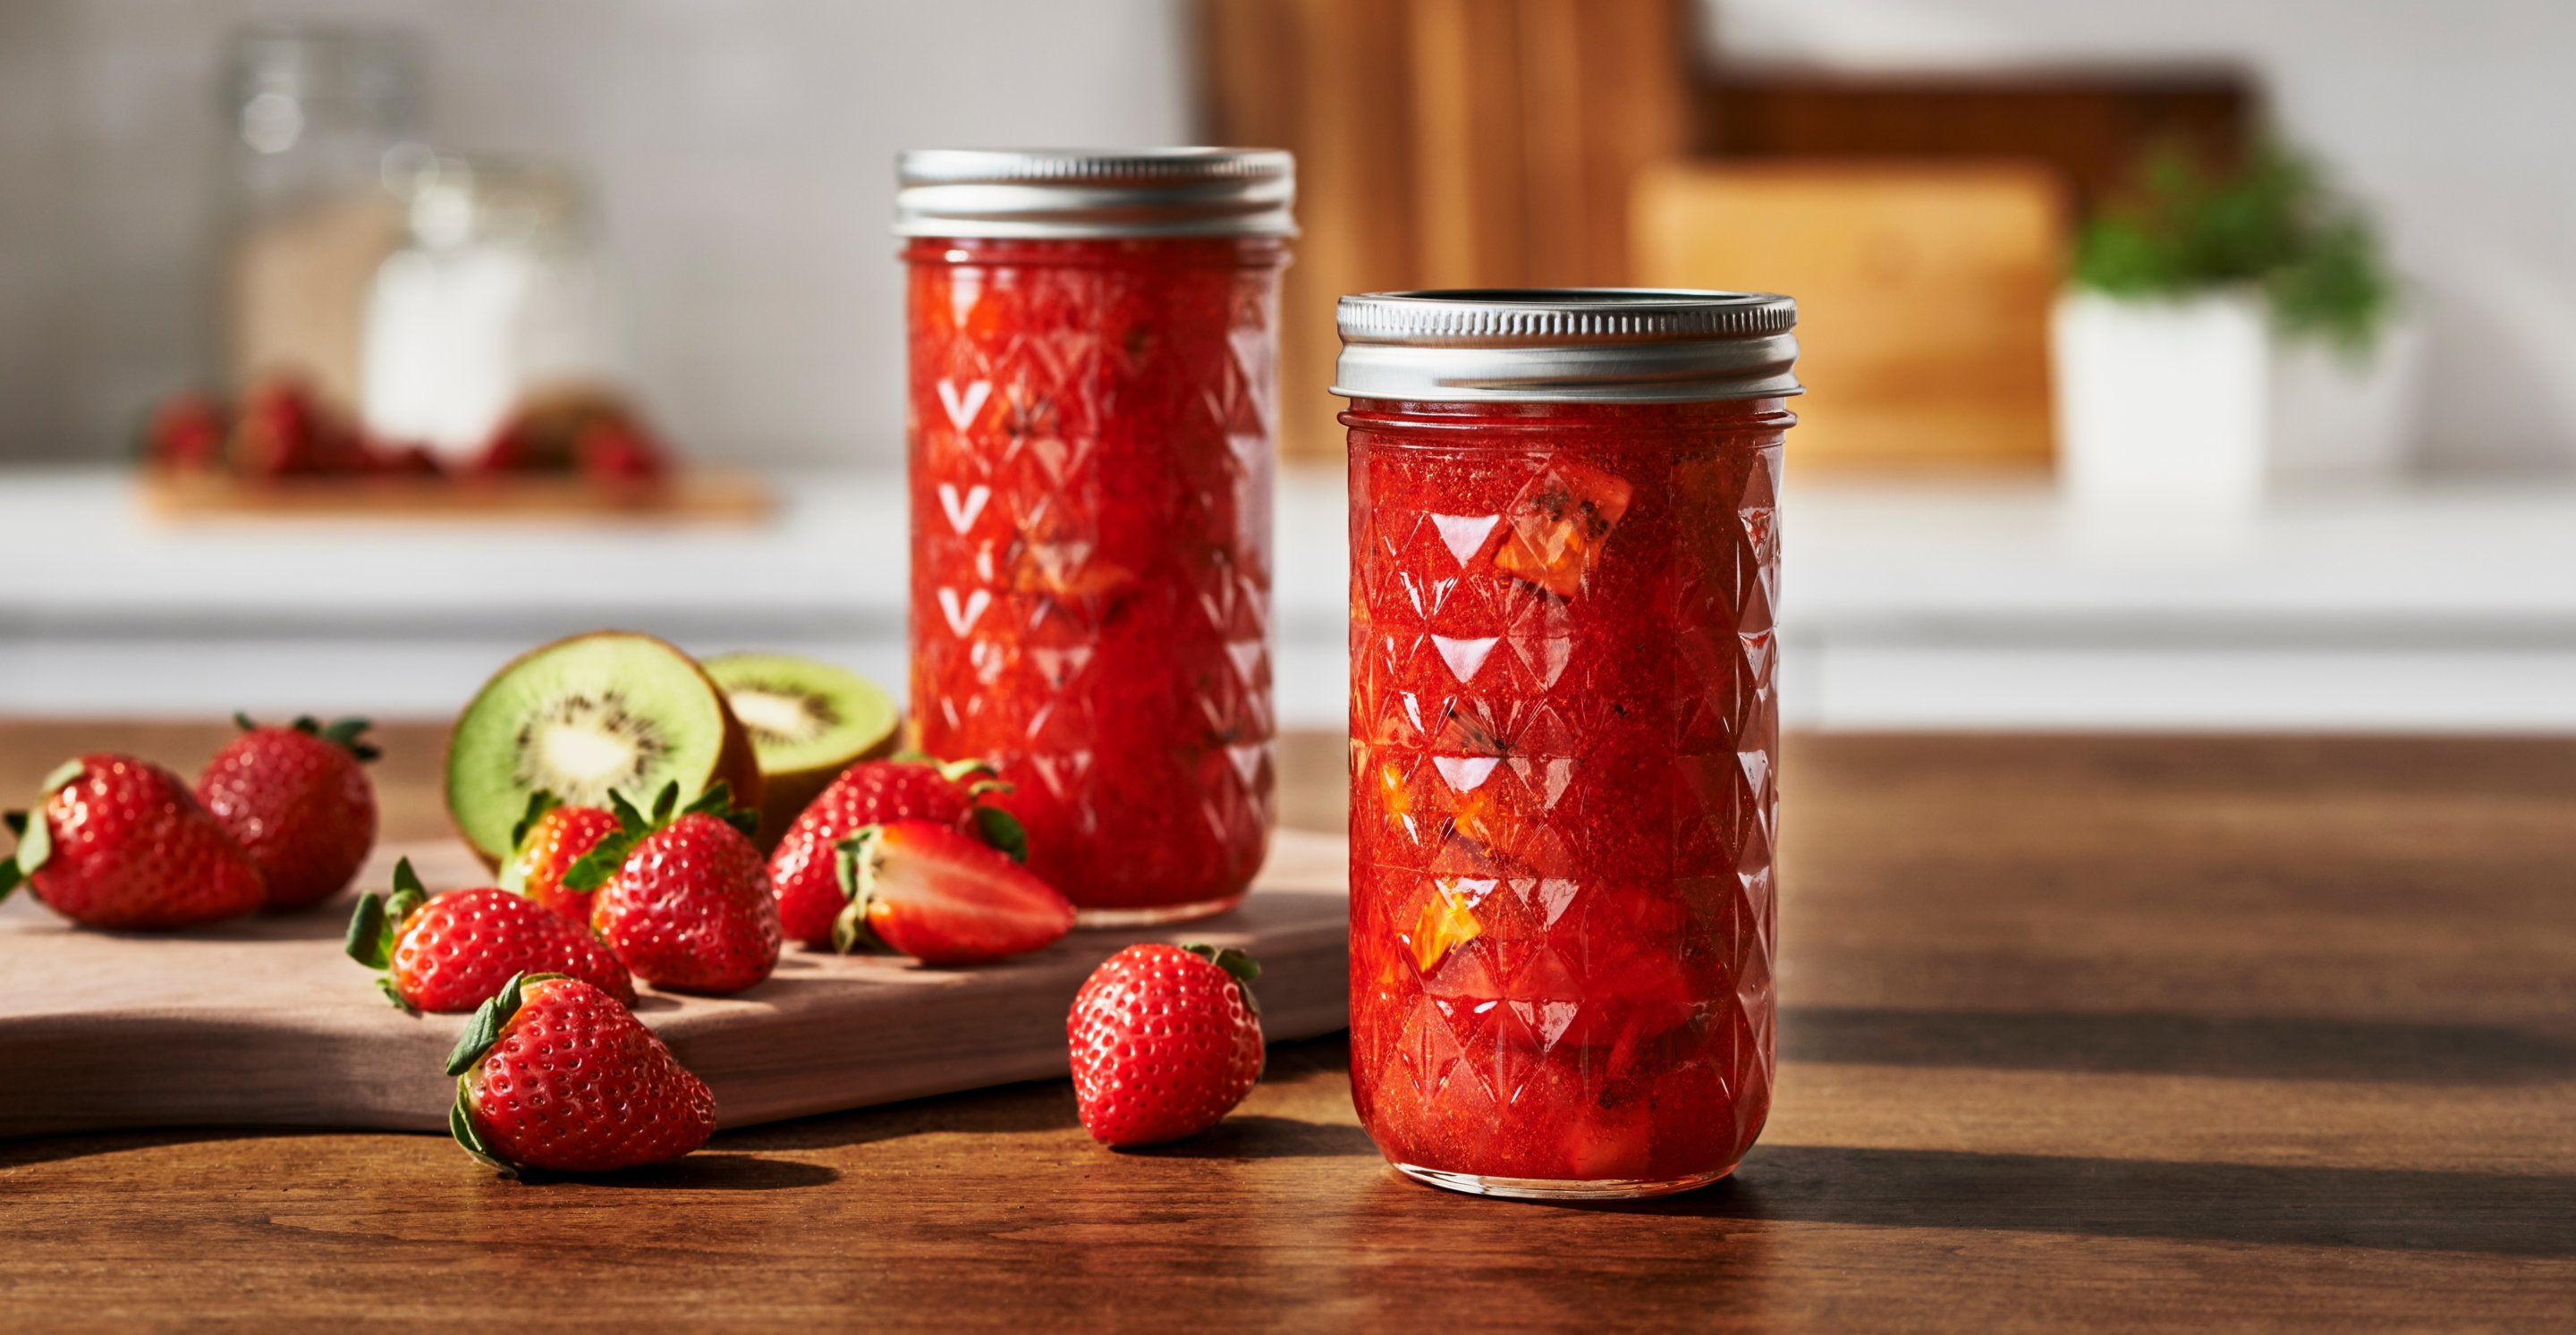 Canned fruit preservatives in mason jars on table in kitchen